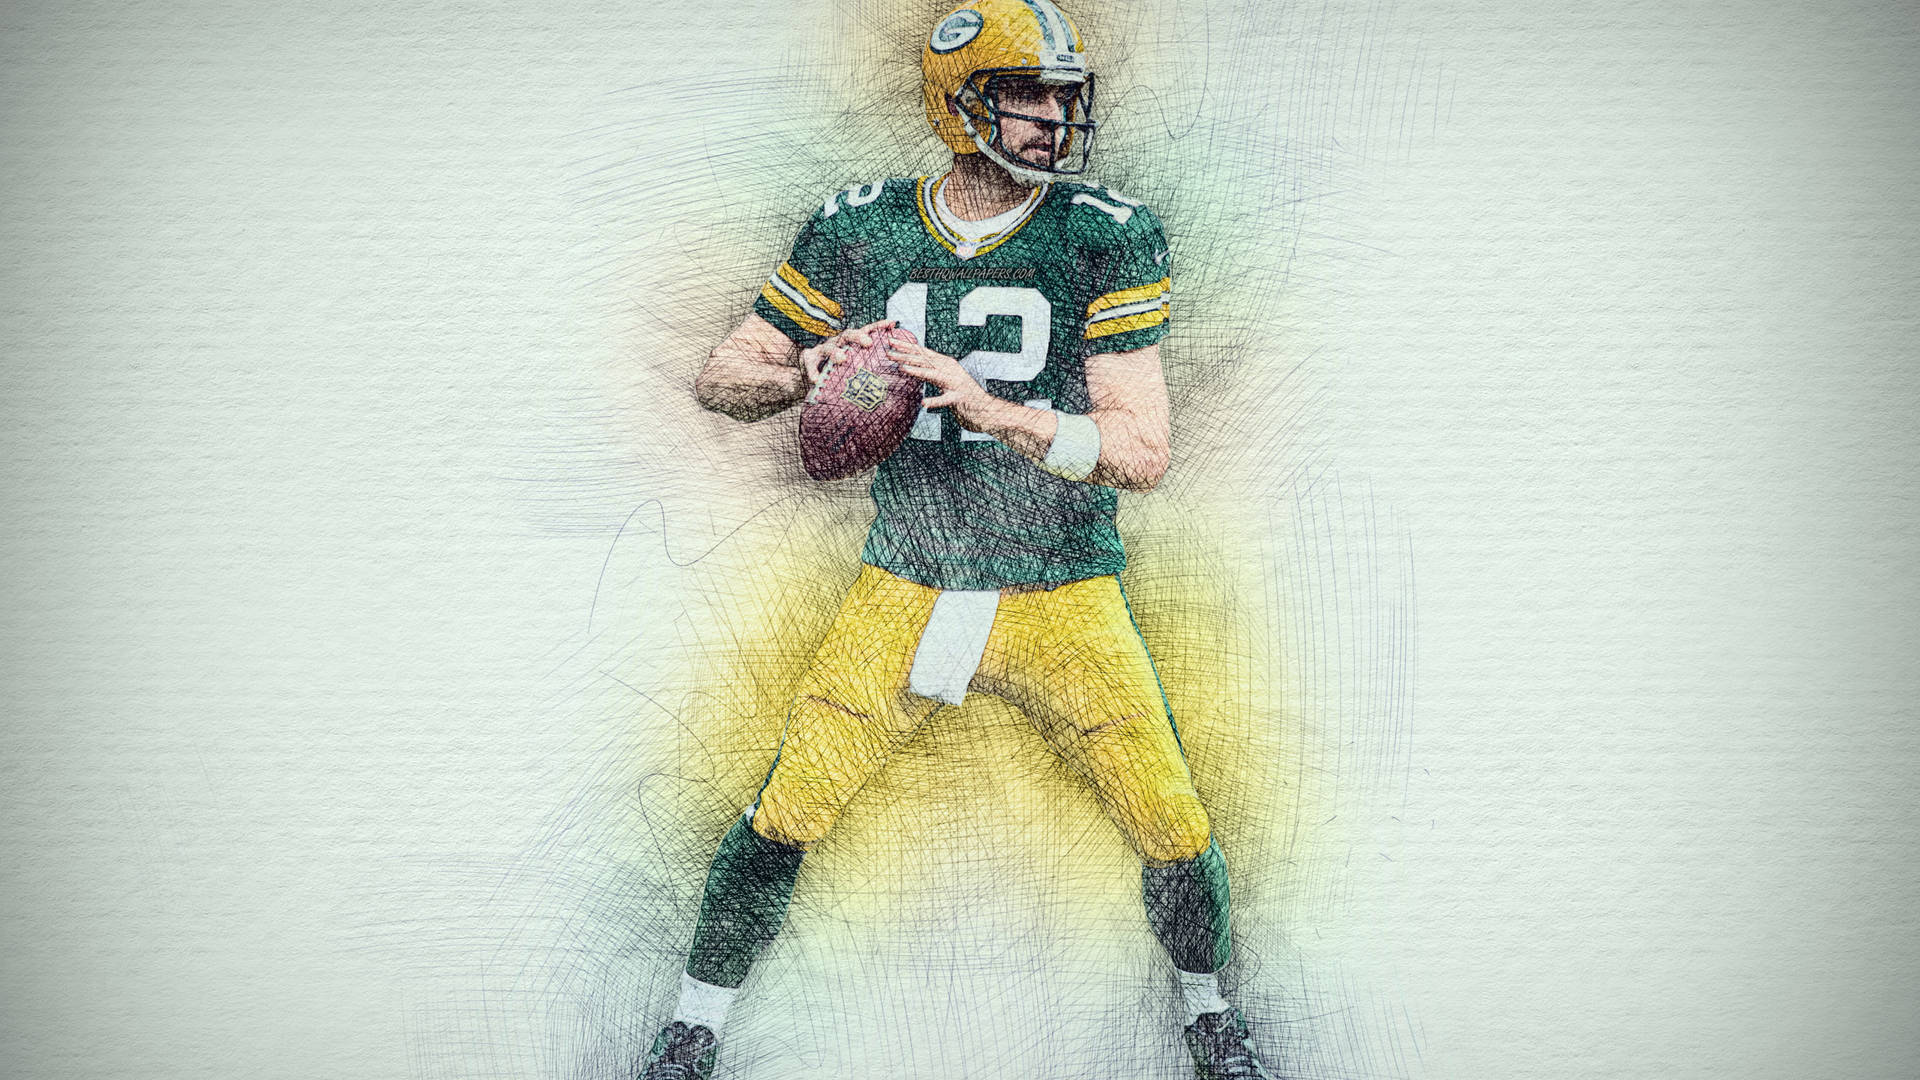 5120X2880 Aaron Rodgers Wallpaper and Background